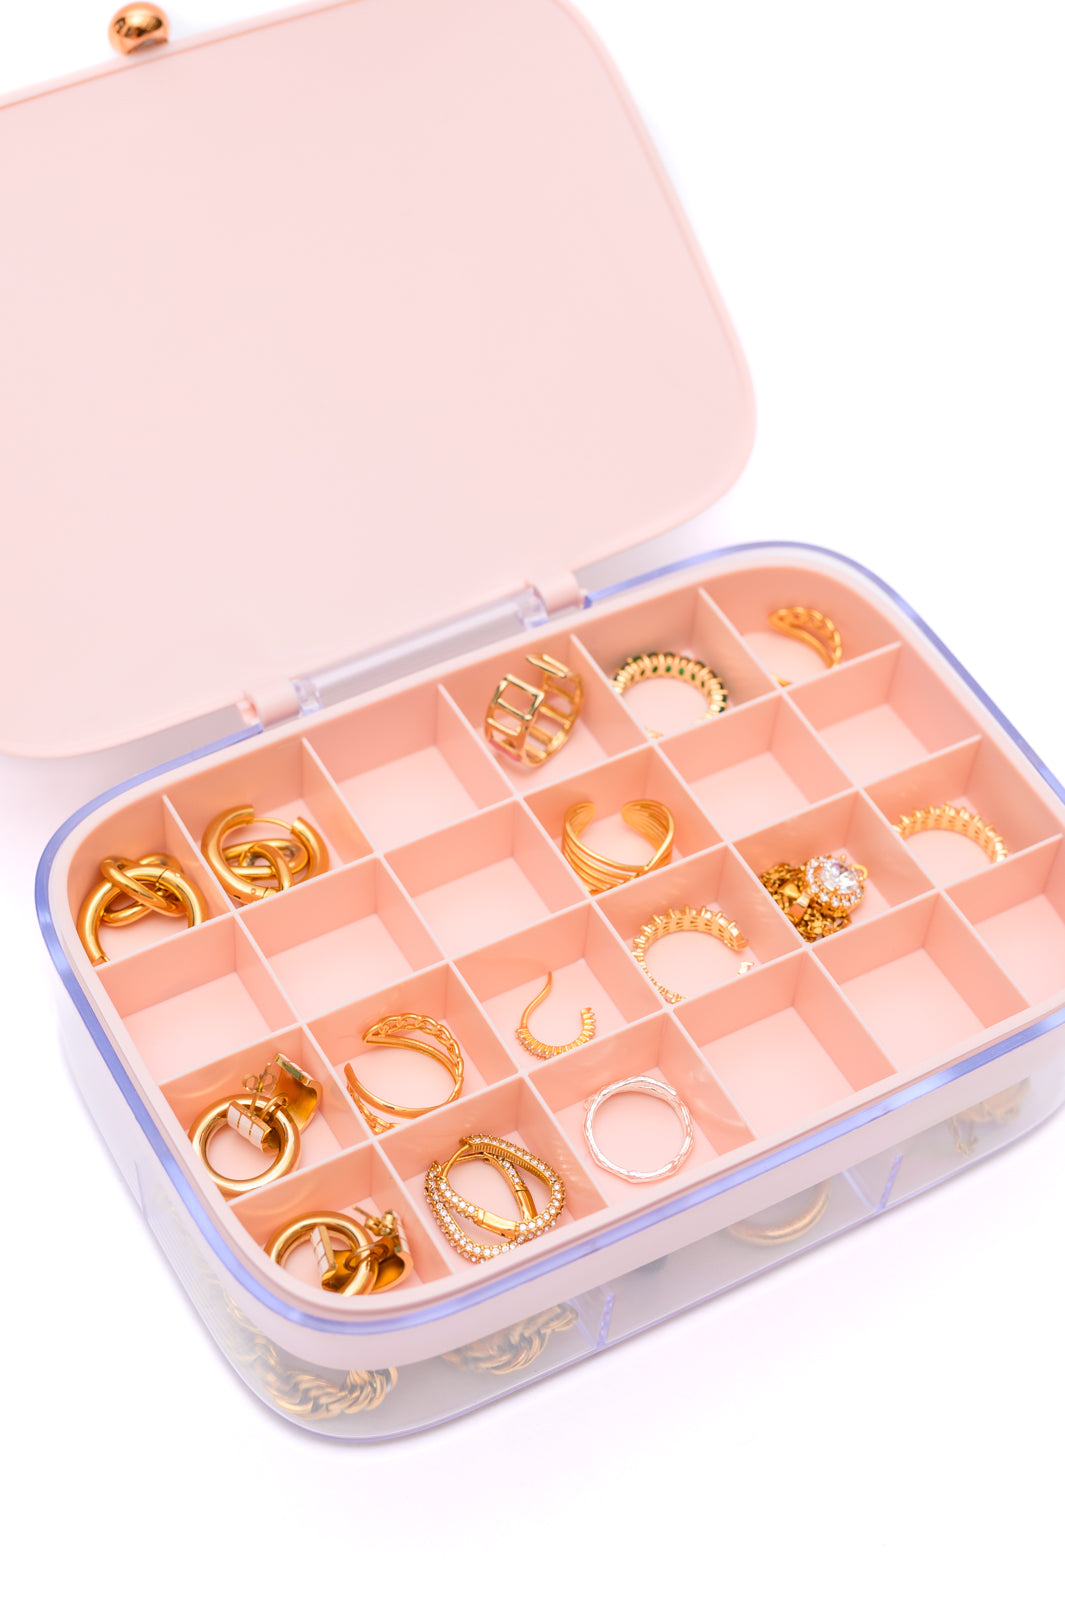 All Sorted Out Jewelry Storage Case in Pink ~ Online Exclusive